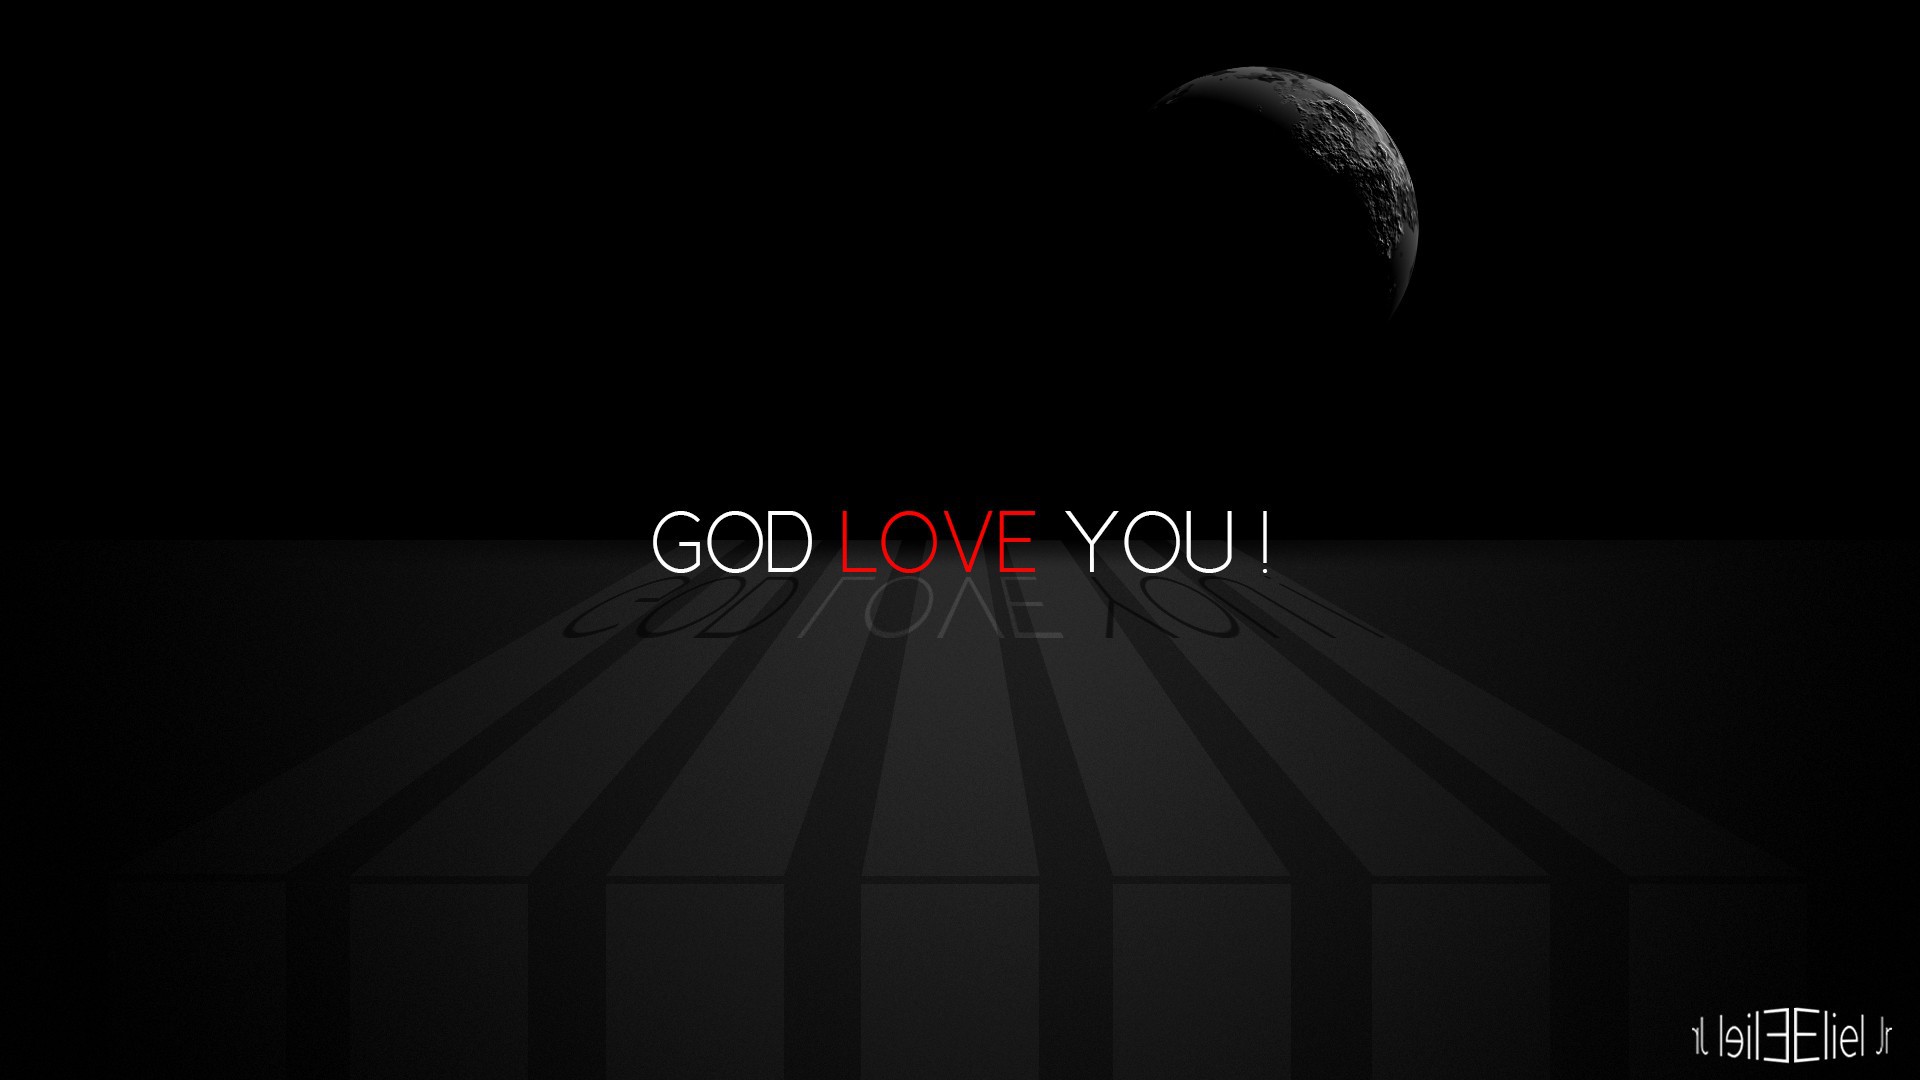 God loves you wallpaper and image, picture, photo